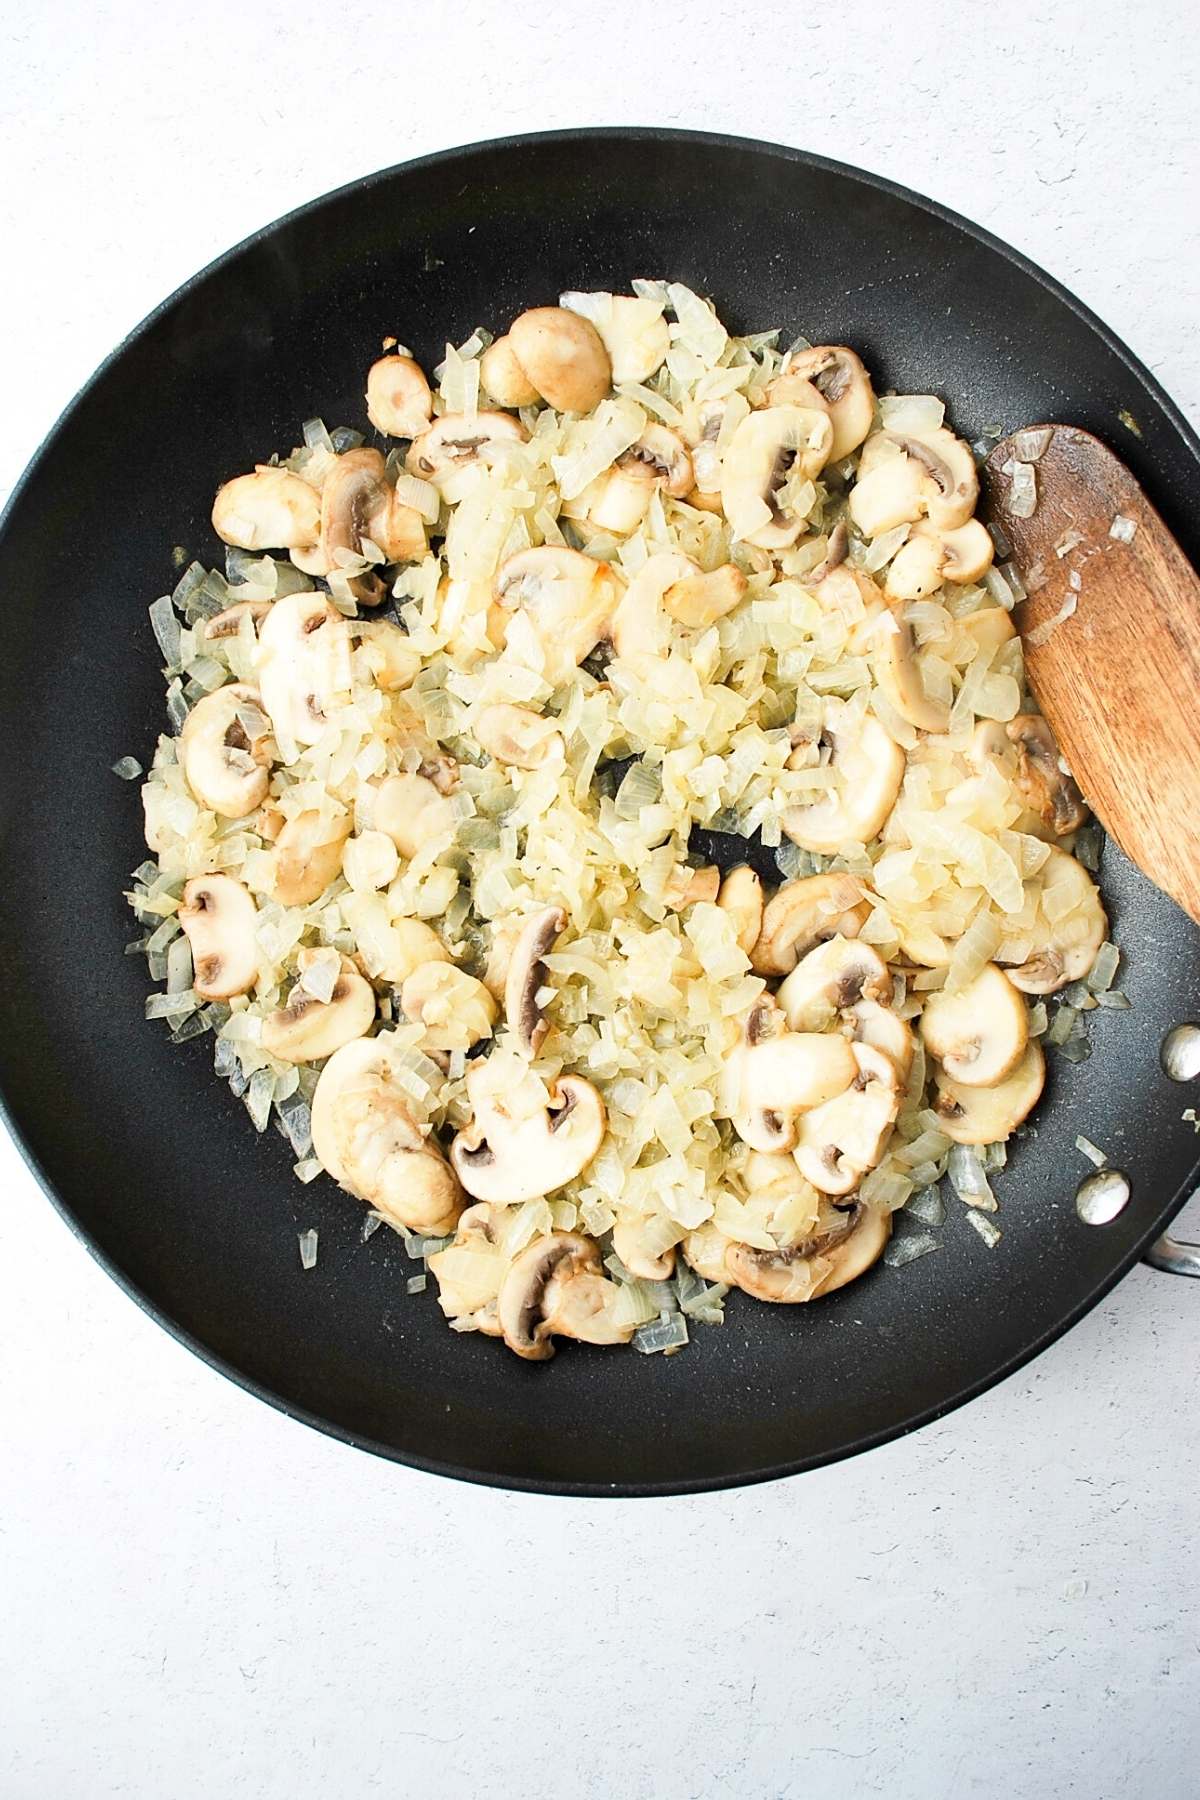 sauteed mushrooms, onion, and garlic in a skillet